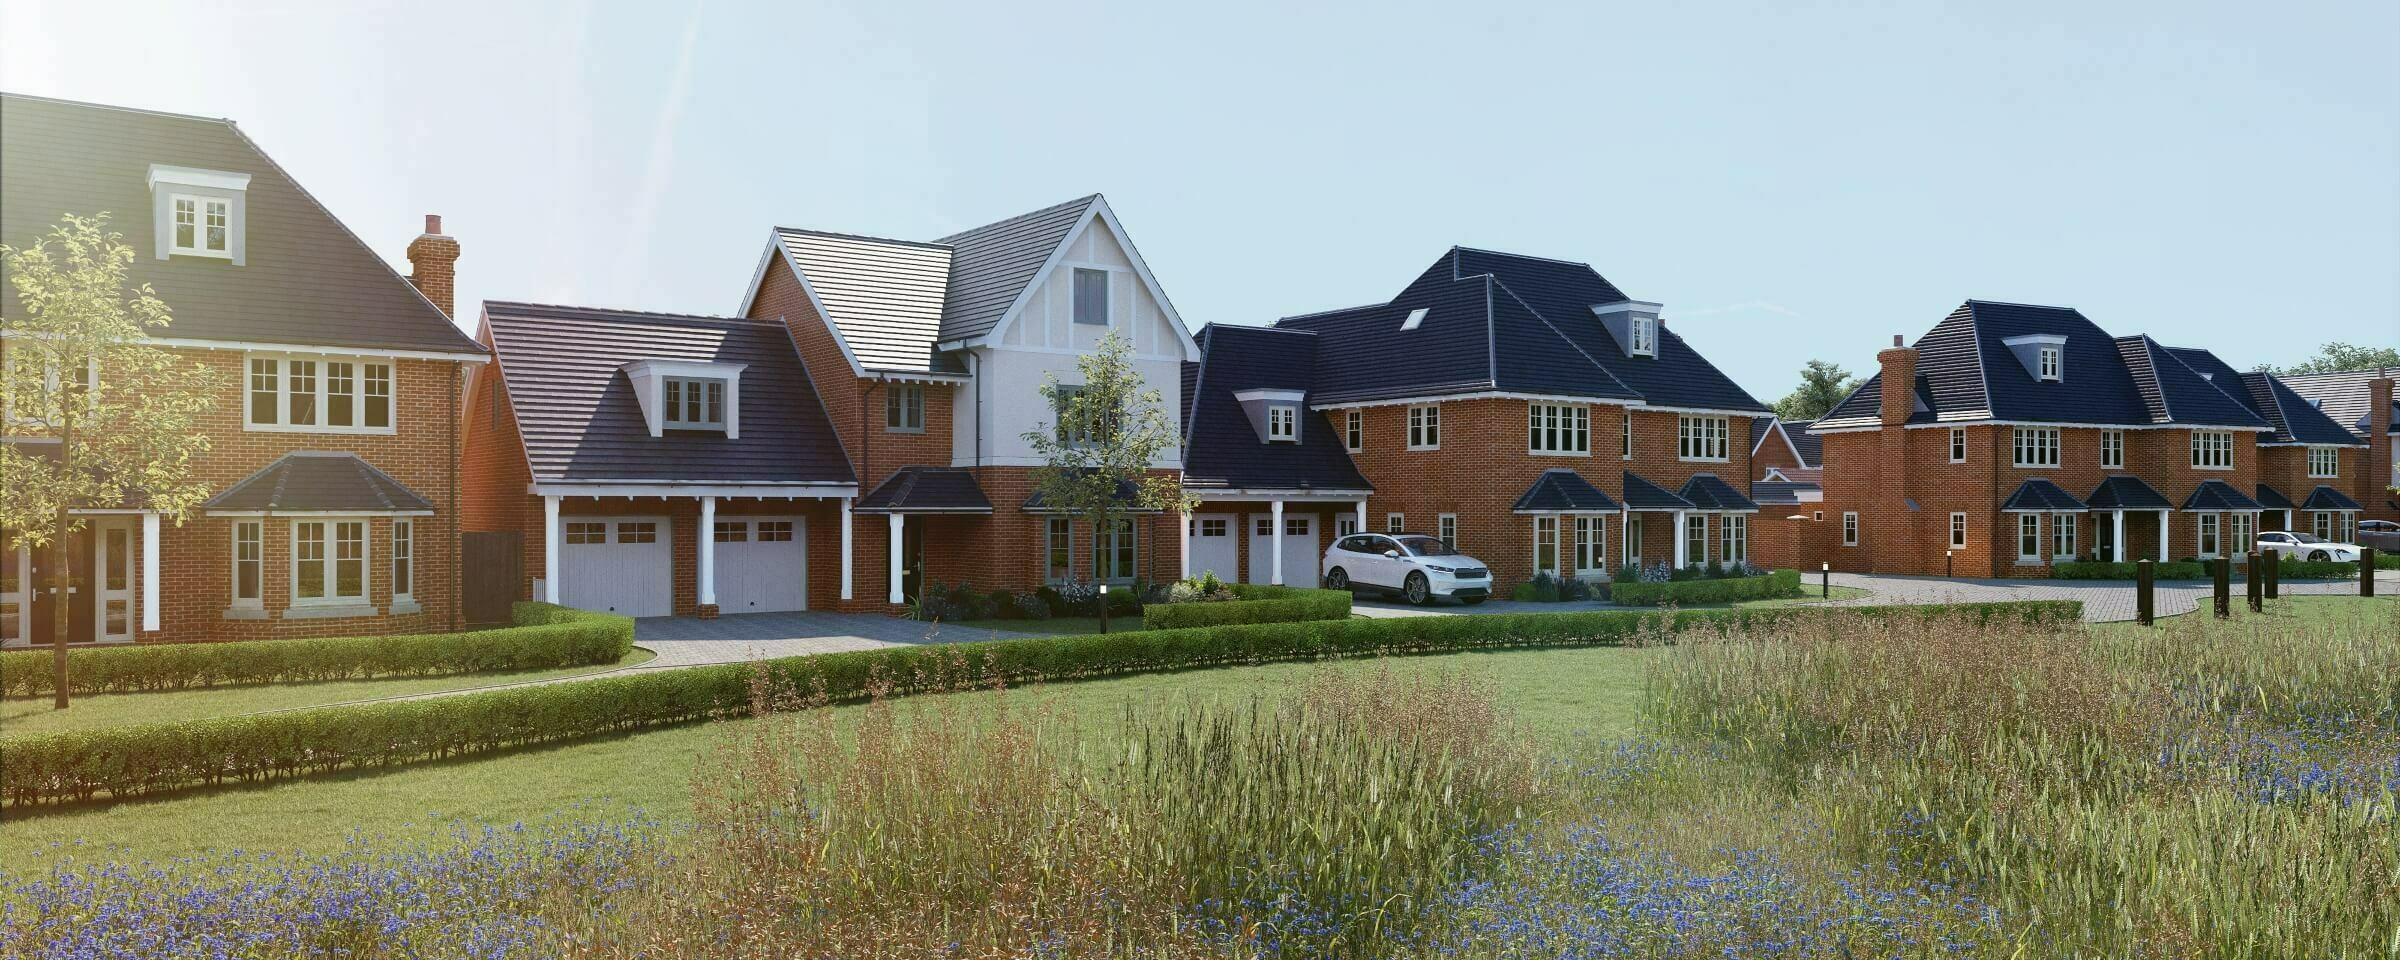 New Build Houses and New Developments Essex by Mersea Homes